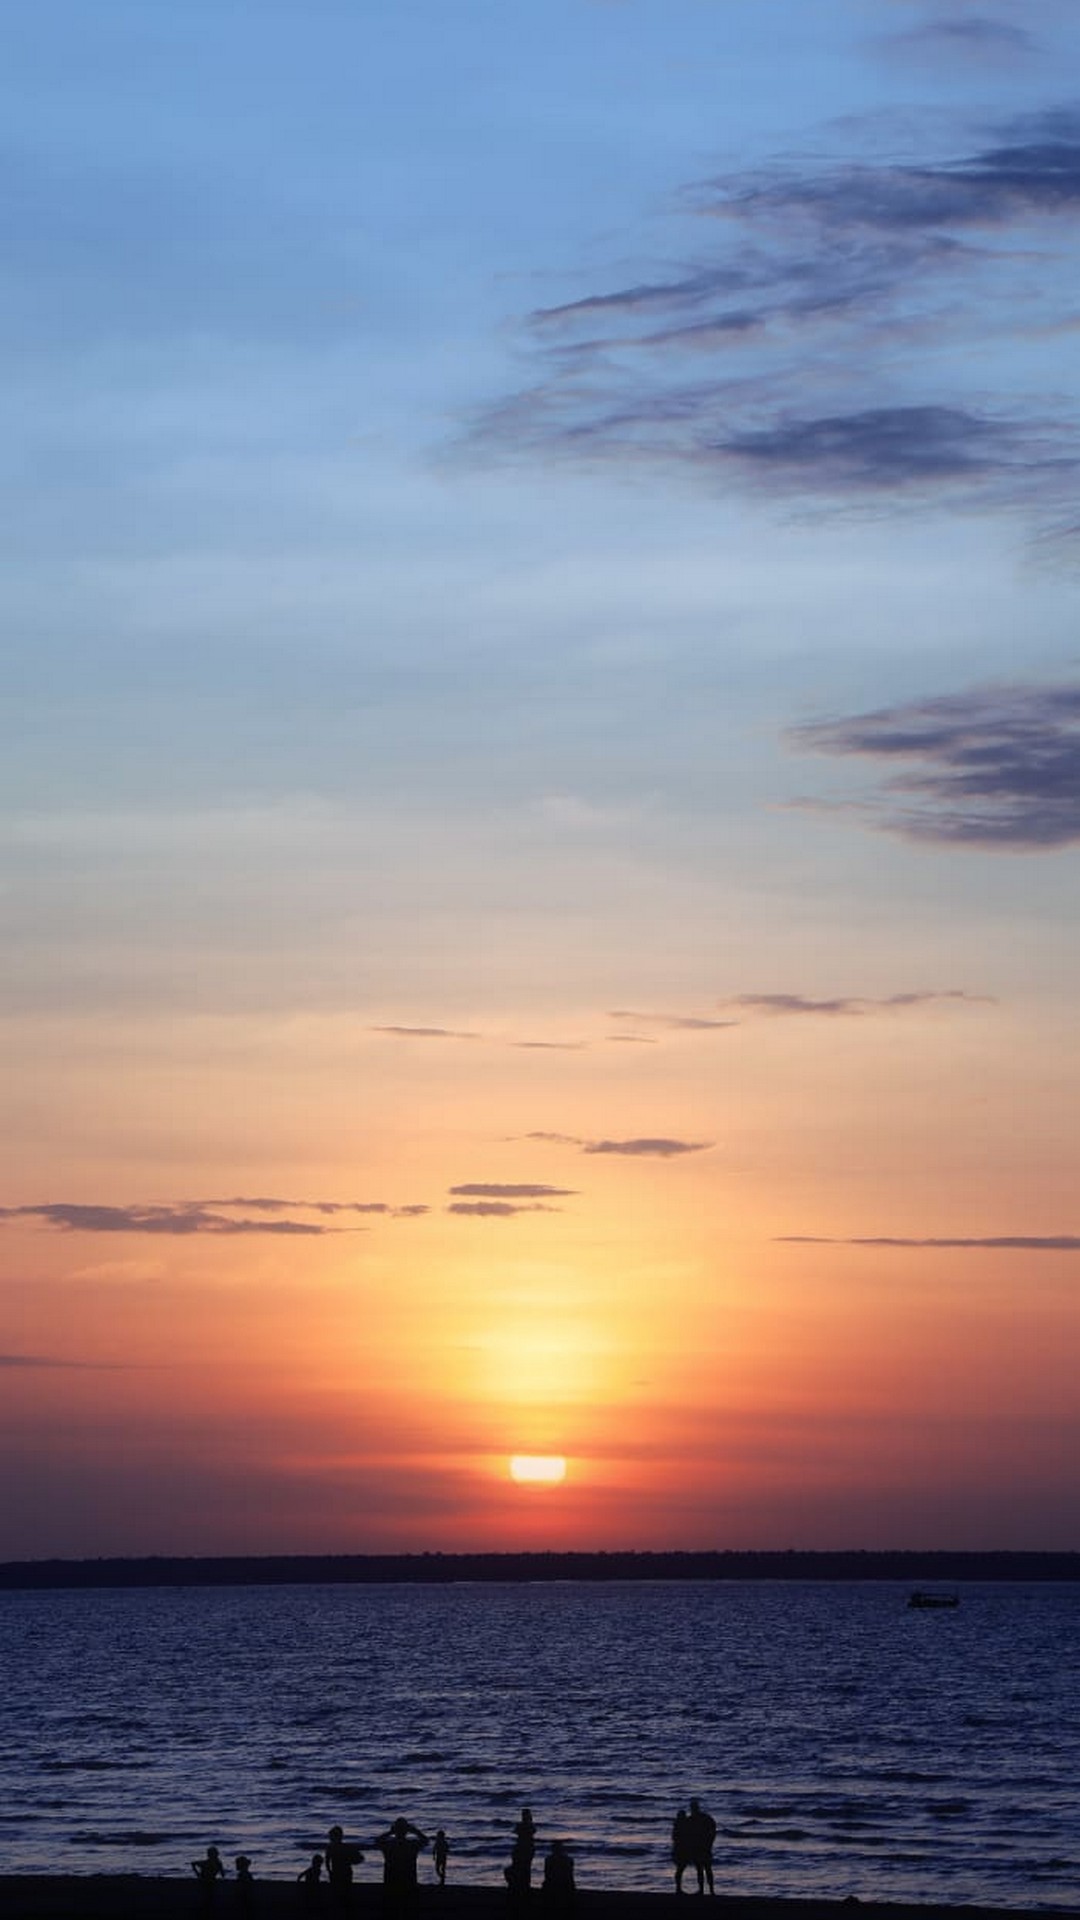 Wallpaper Sunset Android with high-resolution 1080x1920 pixel. You can use this wallpaper for your Android backgrounds, Tablet, Samsung Screensavers, Mobile Phone Lock Screen and another Smartphones device